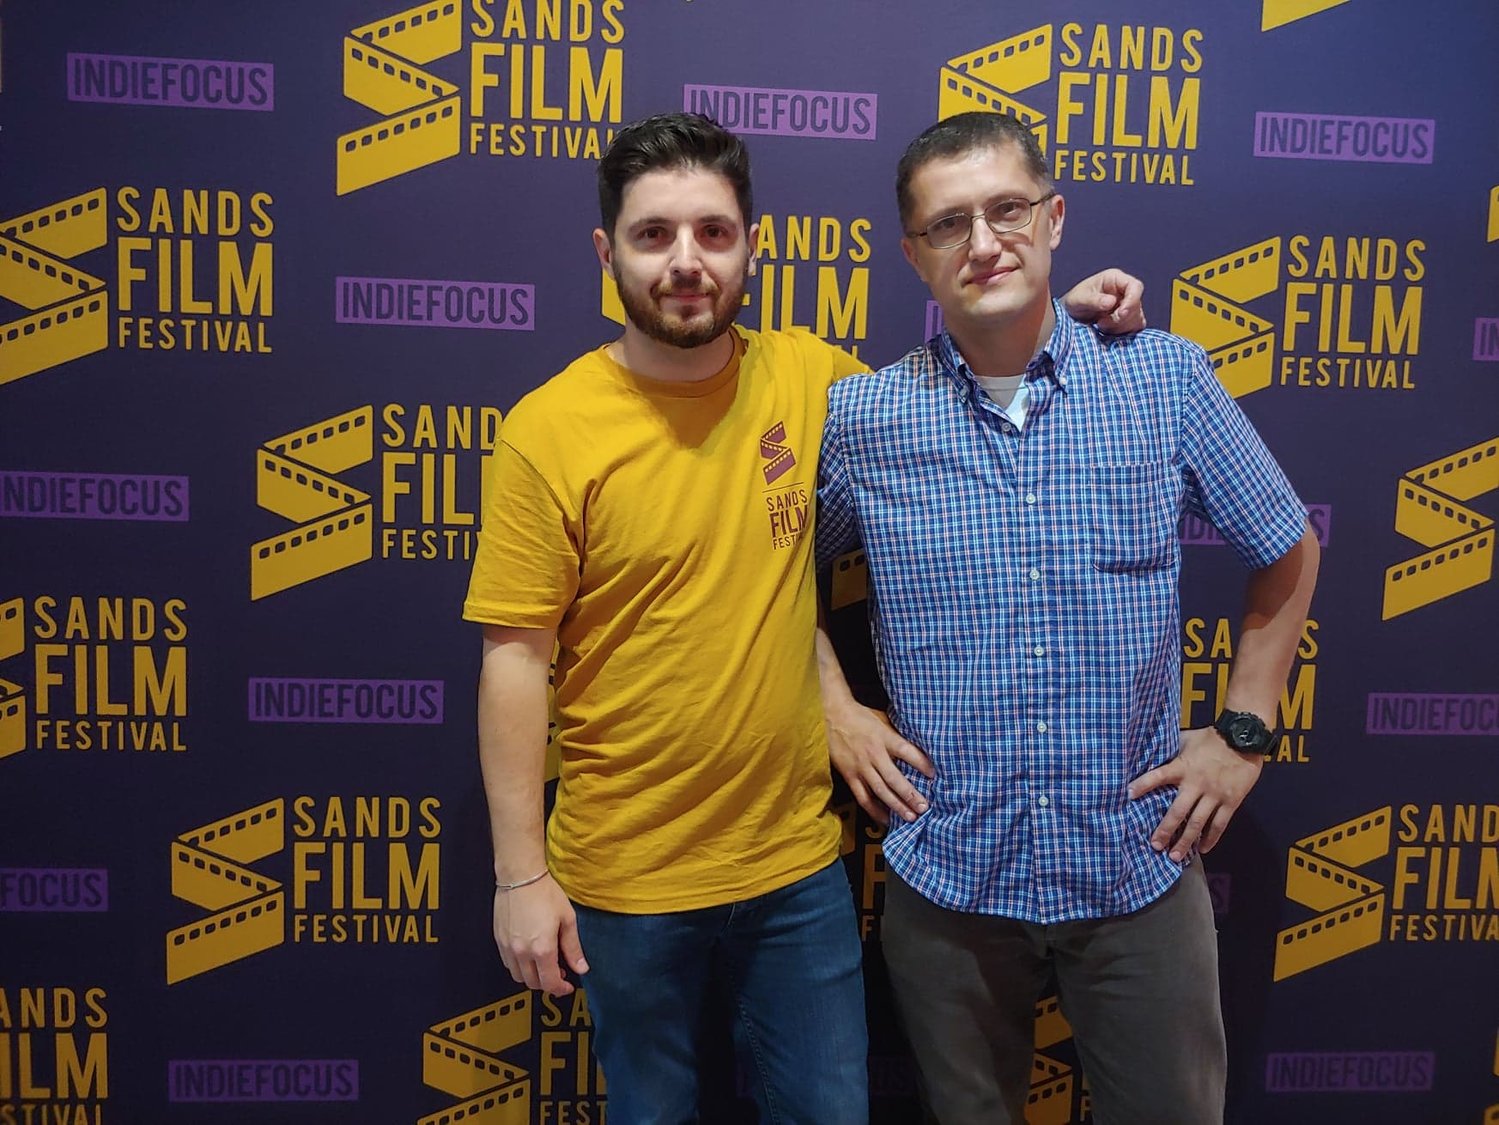 Sands Film Festival creators Irhad and Alen Mutic pose in front of the Sands Film Festival wall. The event was held April 13-14 at Players by the Sea theater in Jacksonville Beach.